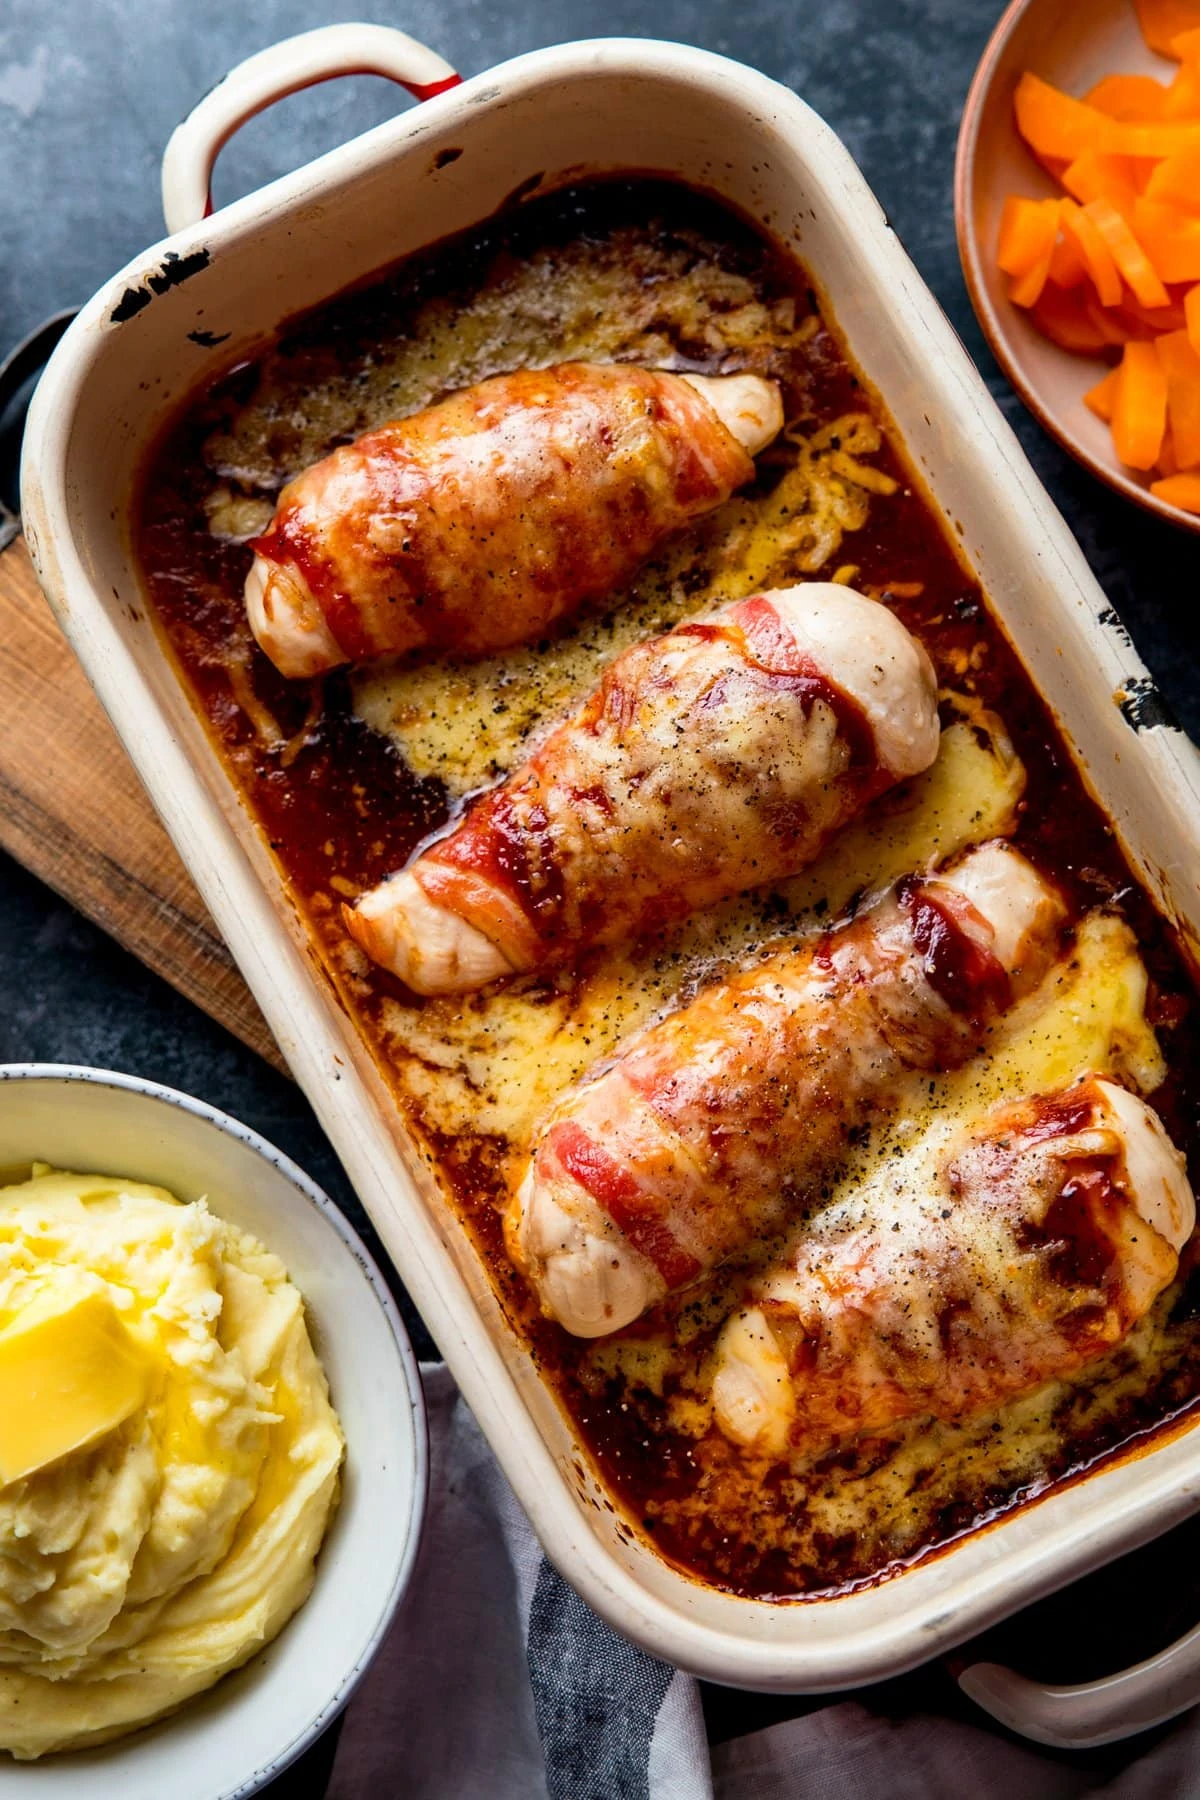 Hunters chicken (chicken with bacon, bbq sauce and cheese) in a baking tin on a dark surface. Side dishes of carrots and mashed potatoes are nearby.